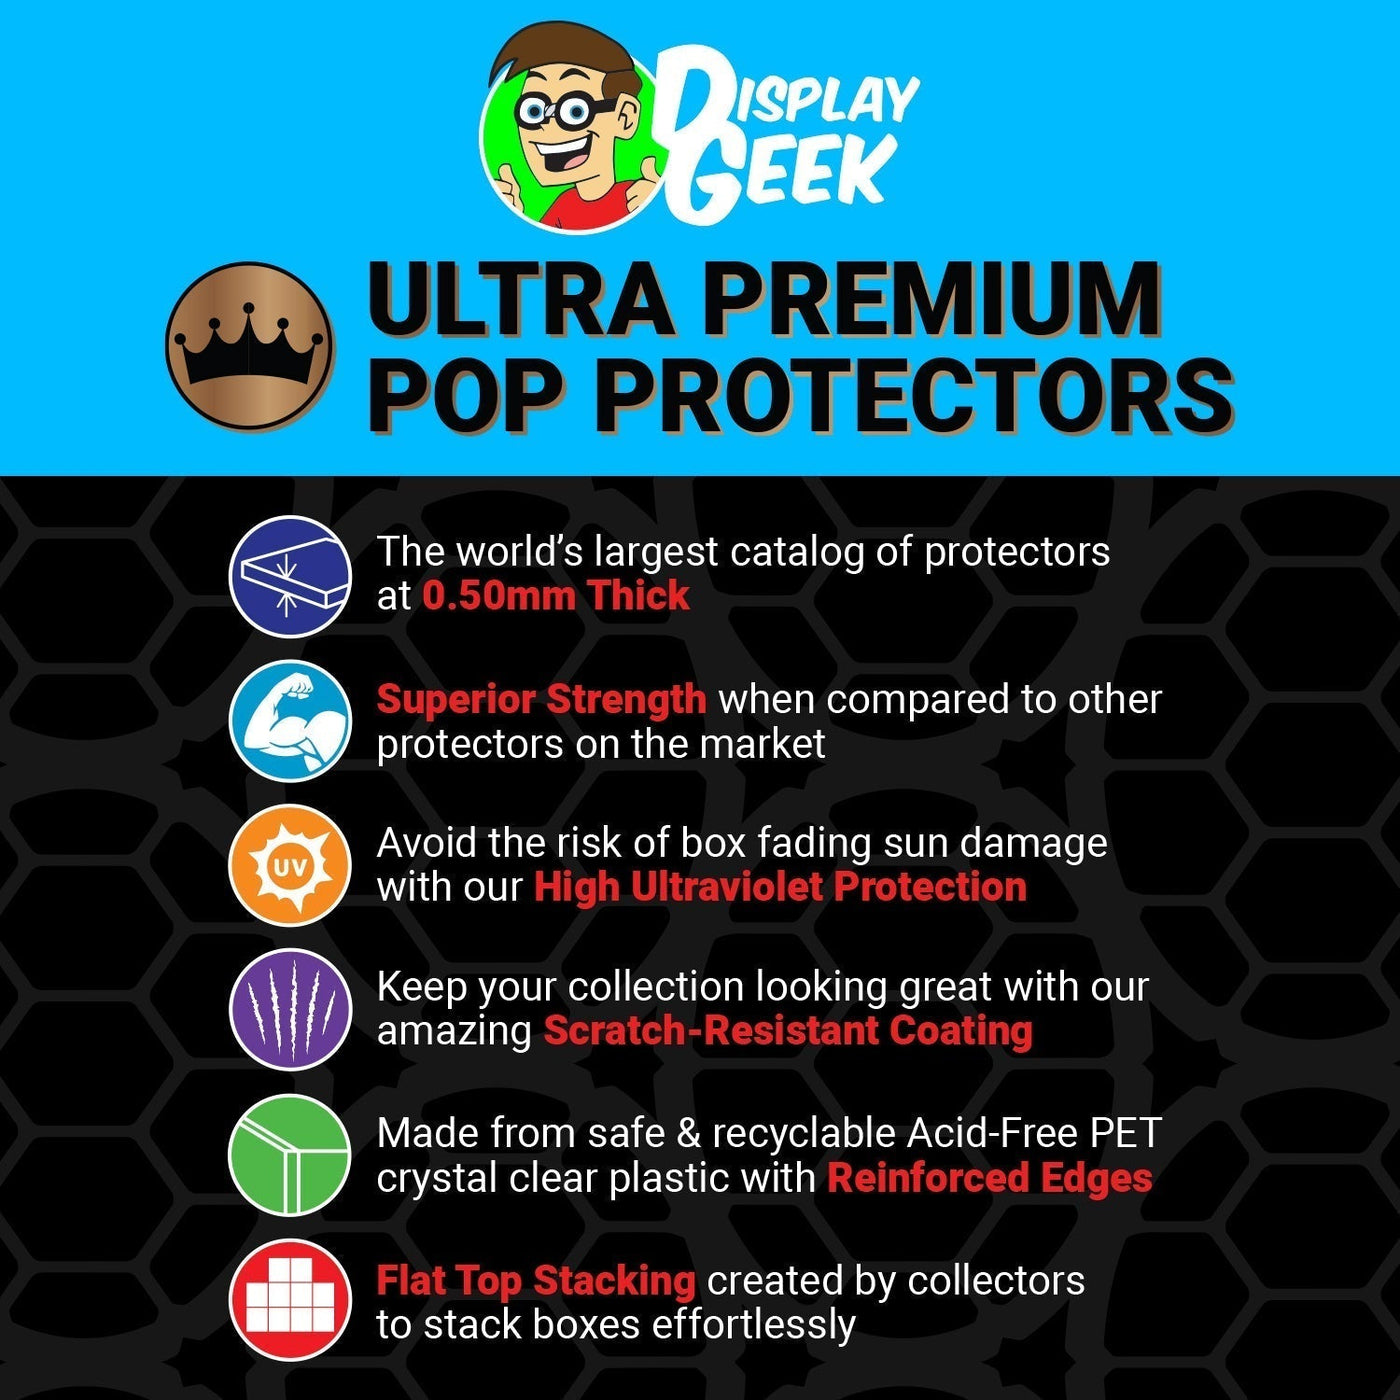 Pop Protector for 6 inch Dragonzord NYCC #534 Super Funko Pop on The Protector Guide App by Display Geek